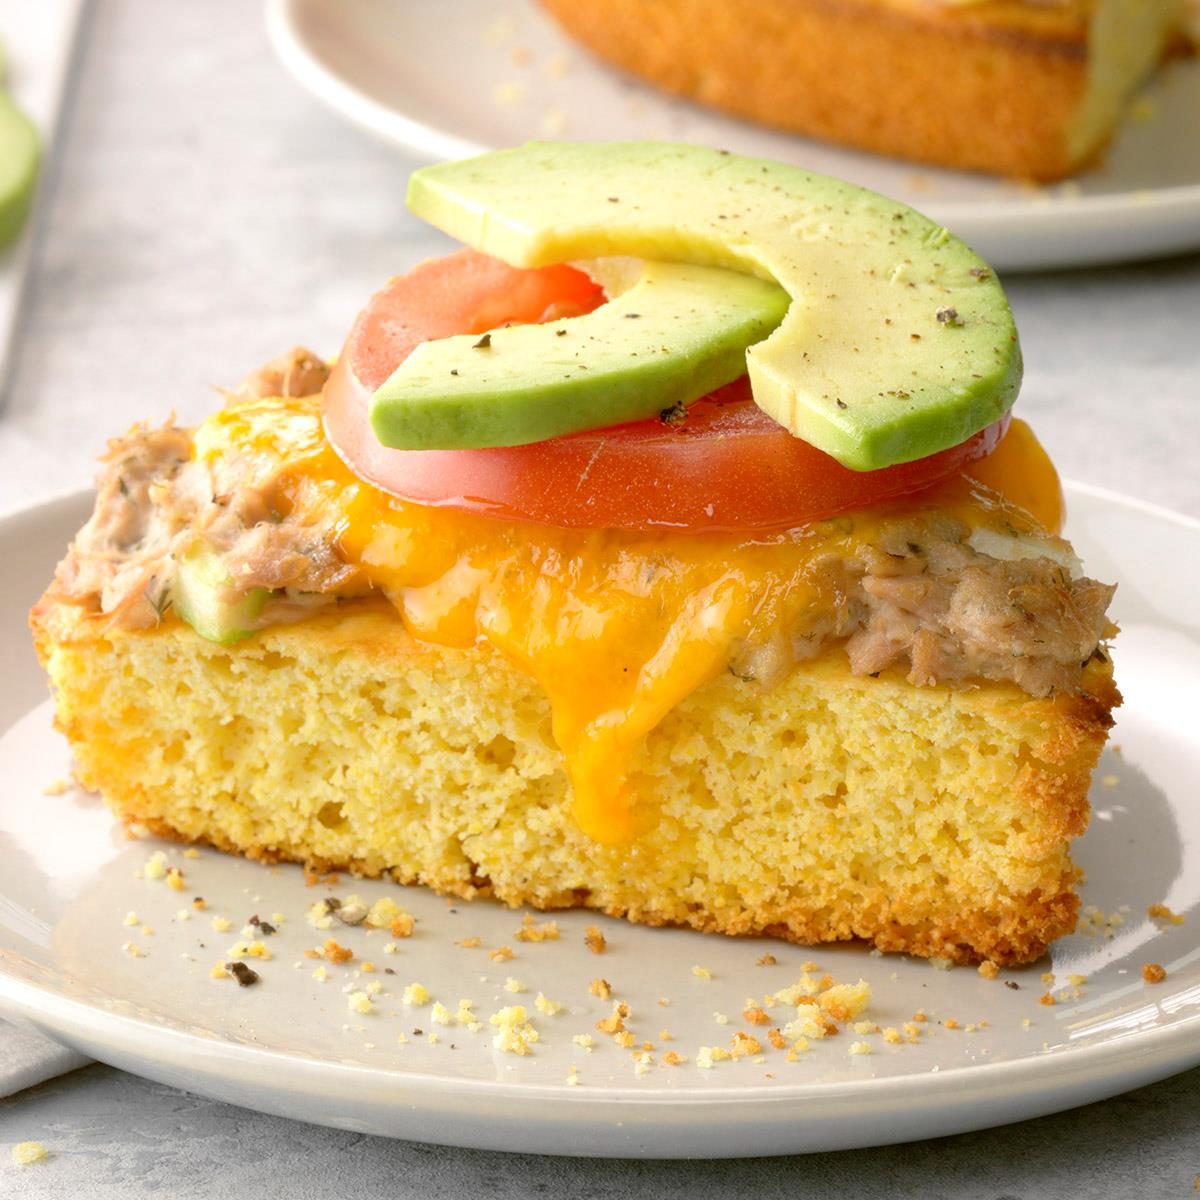 <p>Try our rendition of an open-faced tuna melt. Serve it on cornbread for a quick lunch or dinner. —<i>Taste of Home</i> Test Kitchen</p> <div class="listicle-page__buttons"> <div class="listicle-page__cta-button"><a href='https://www.tasteofhome.com/recipes/tuna-melt-on-cornbread/'>Get Recipe</a></div> </div>